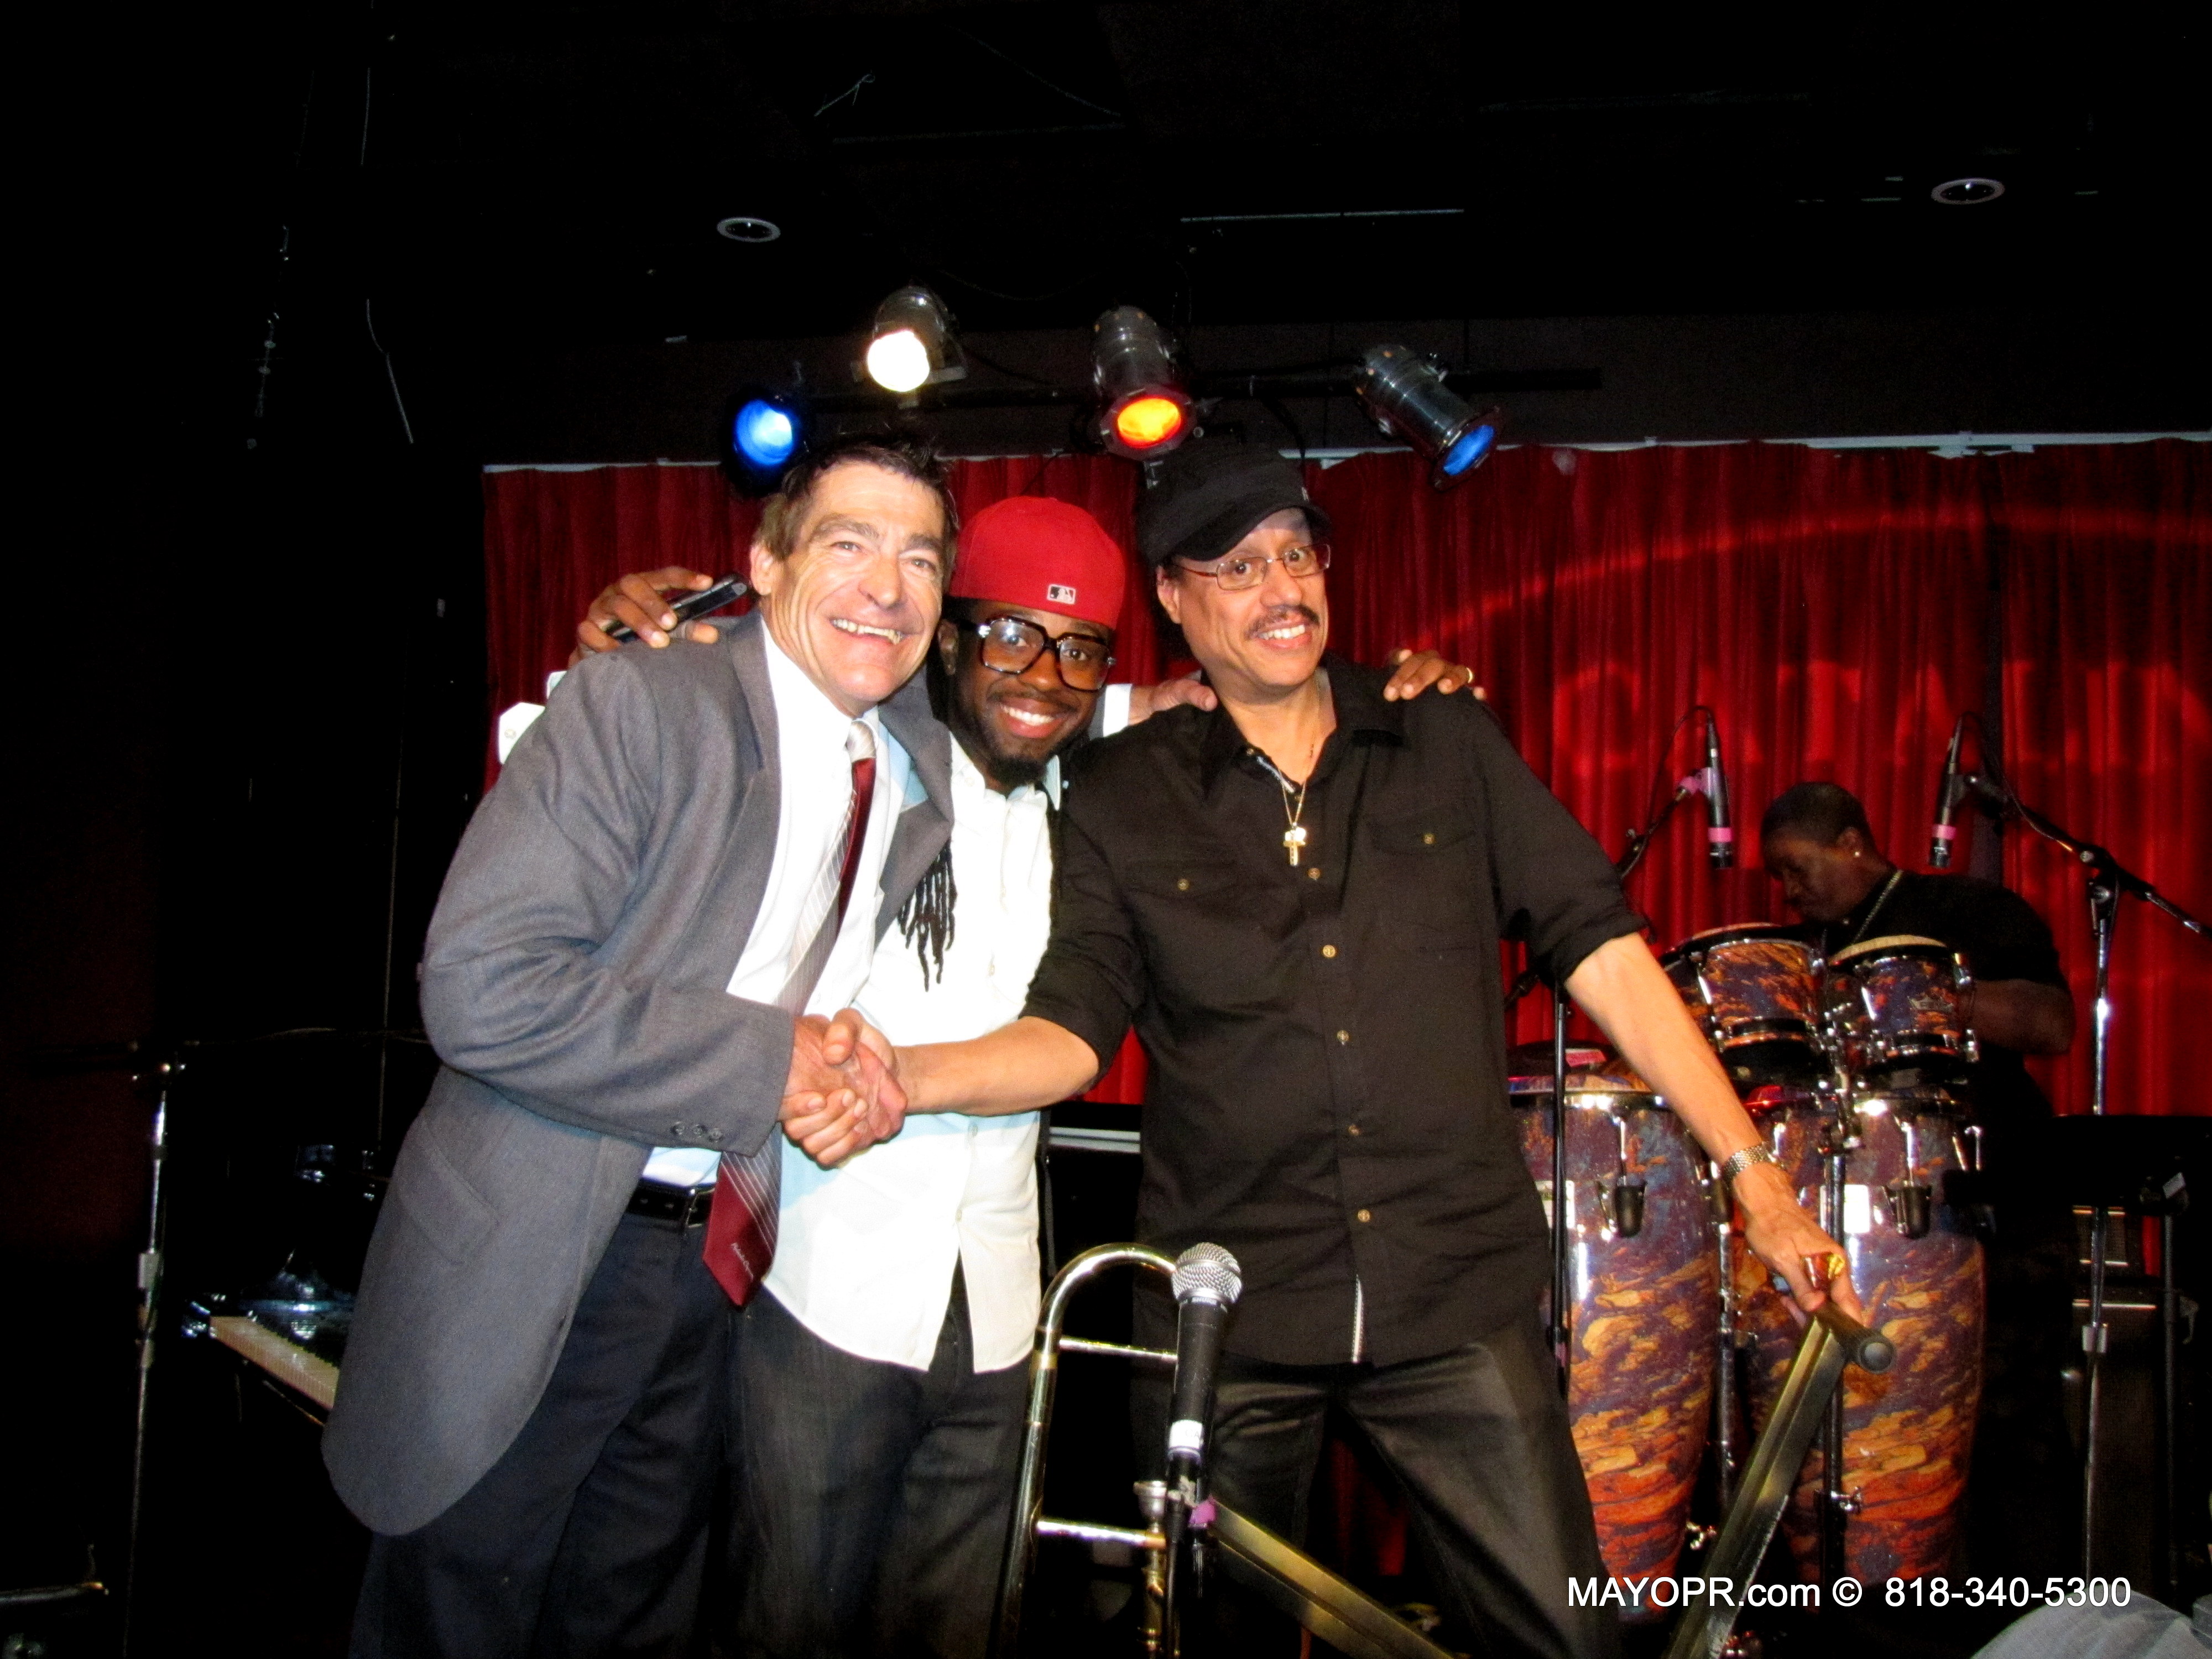 Buddy Princeton & the Incorruptibles shakes hands with Earth, Wind & Fire's former keyboardist Larry Dunn, who performed with Jon Barnes, Theresa King, Luis Montilla, Carlos Sanchez and other Jazz Giants rock the Catalina Jazz Club.